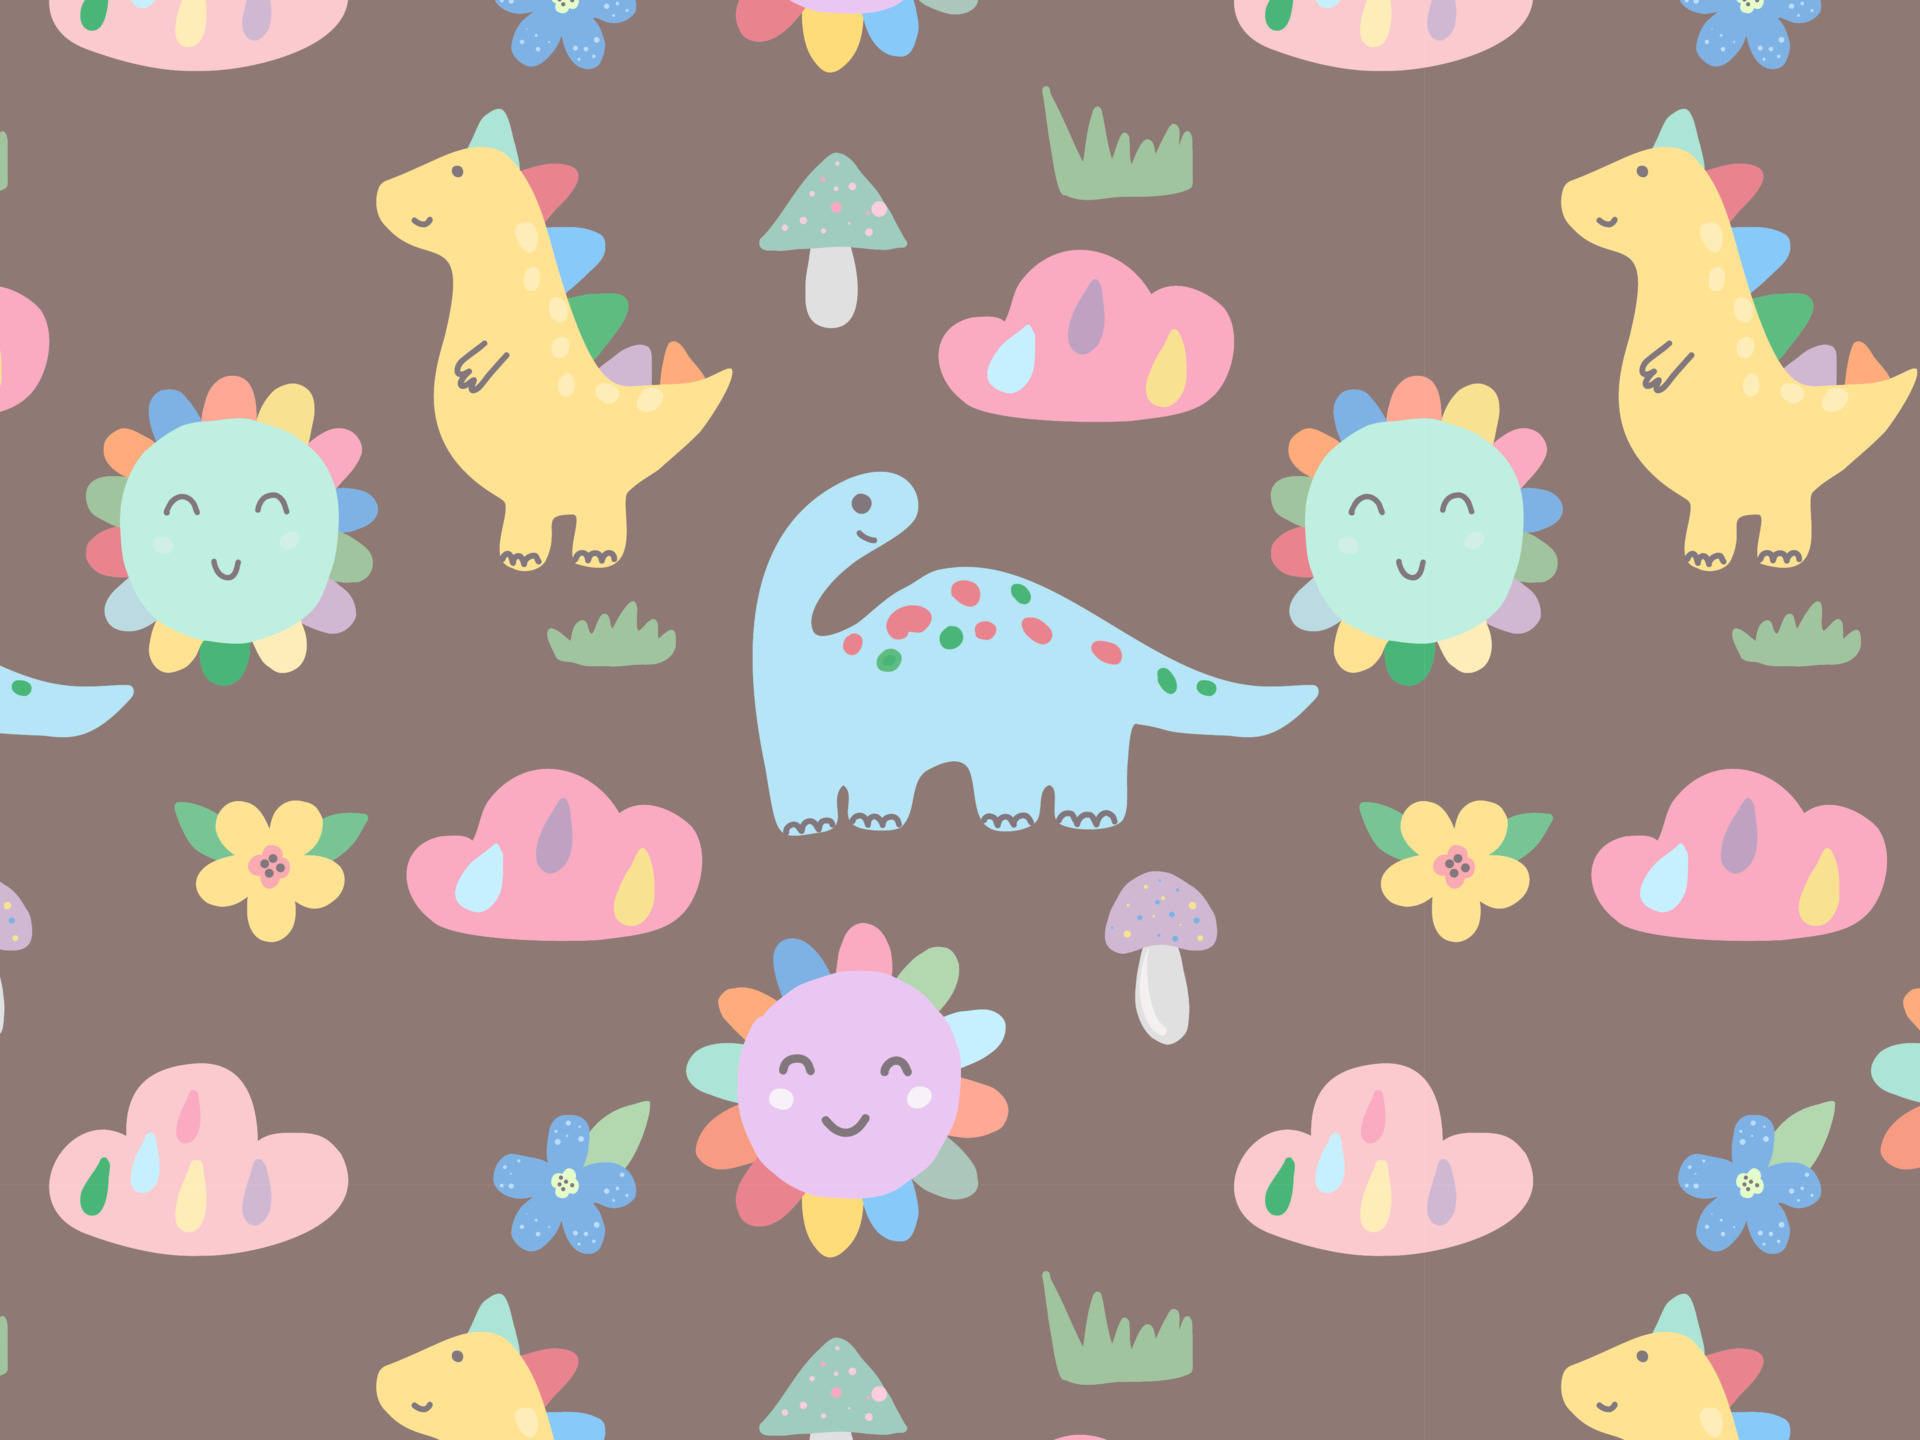 Brighten up your day with a Cute Dinosaur Pattern Wallpaper